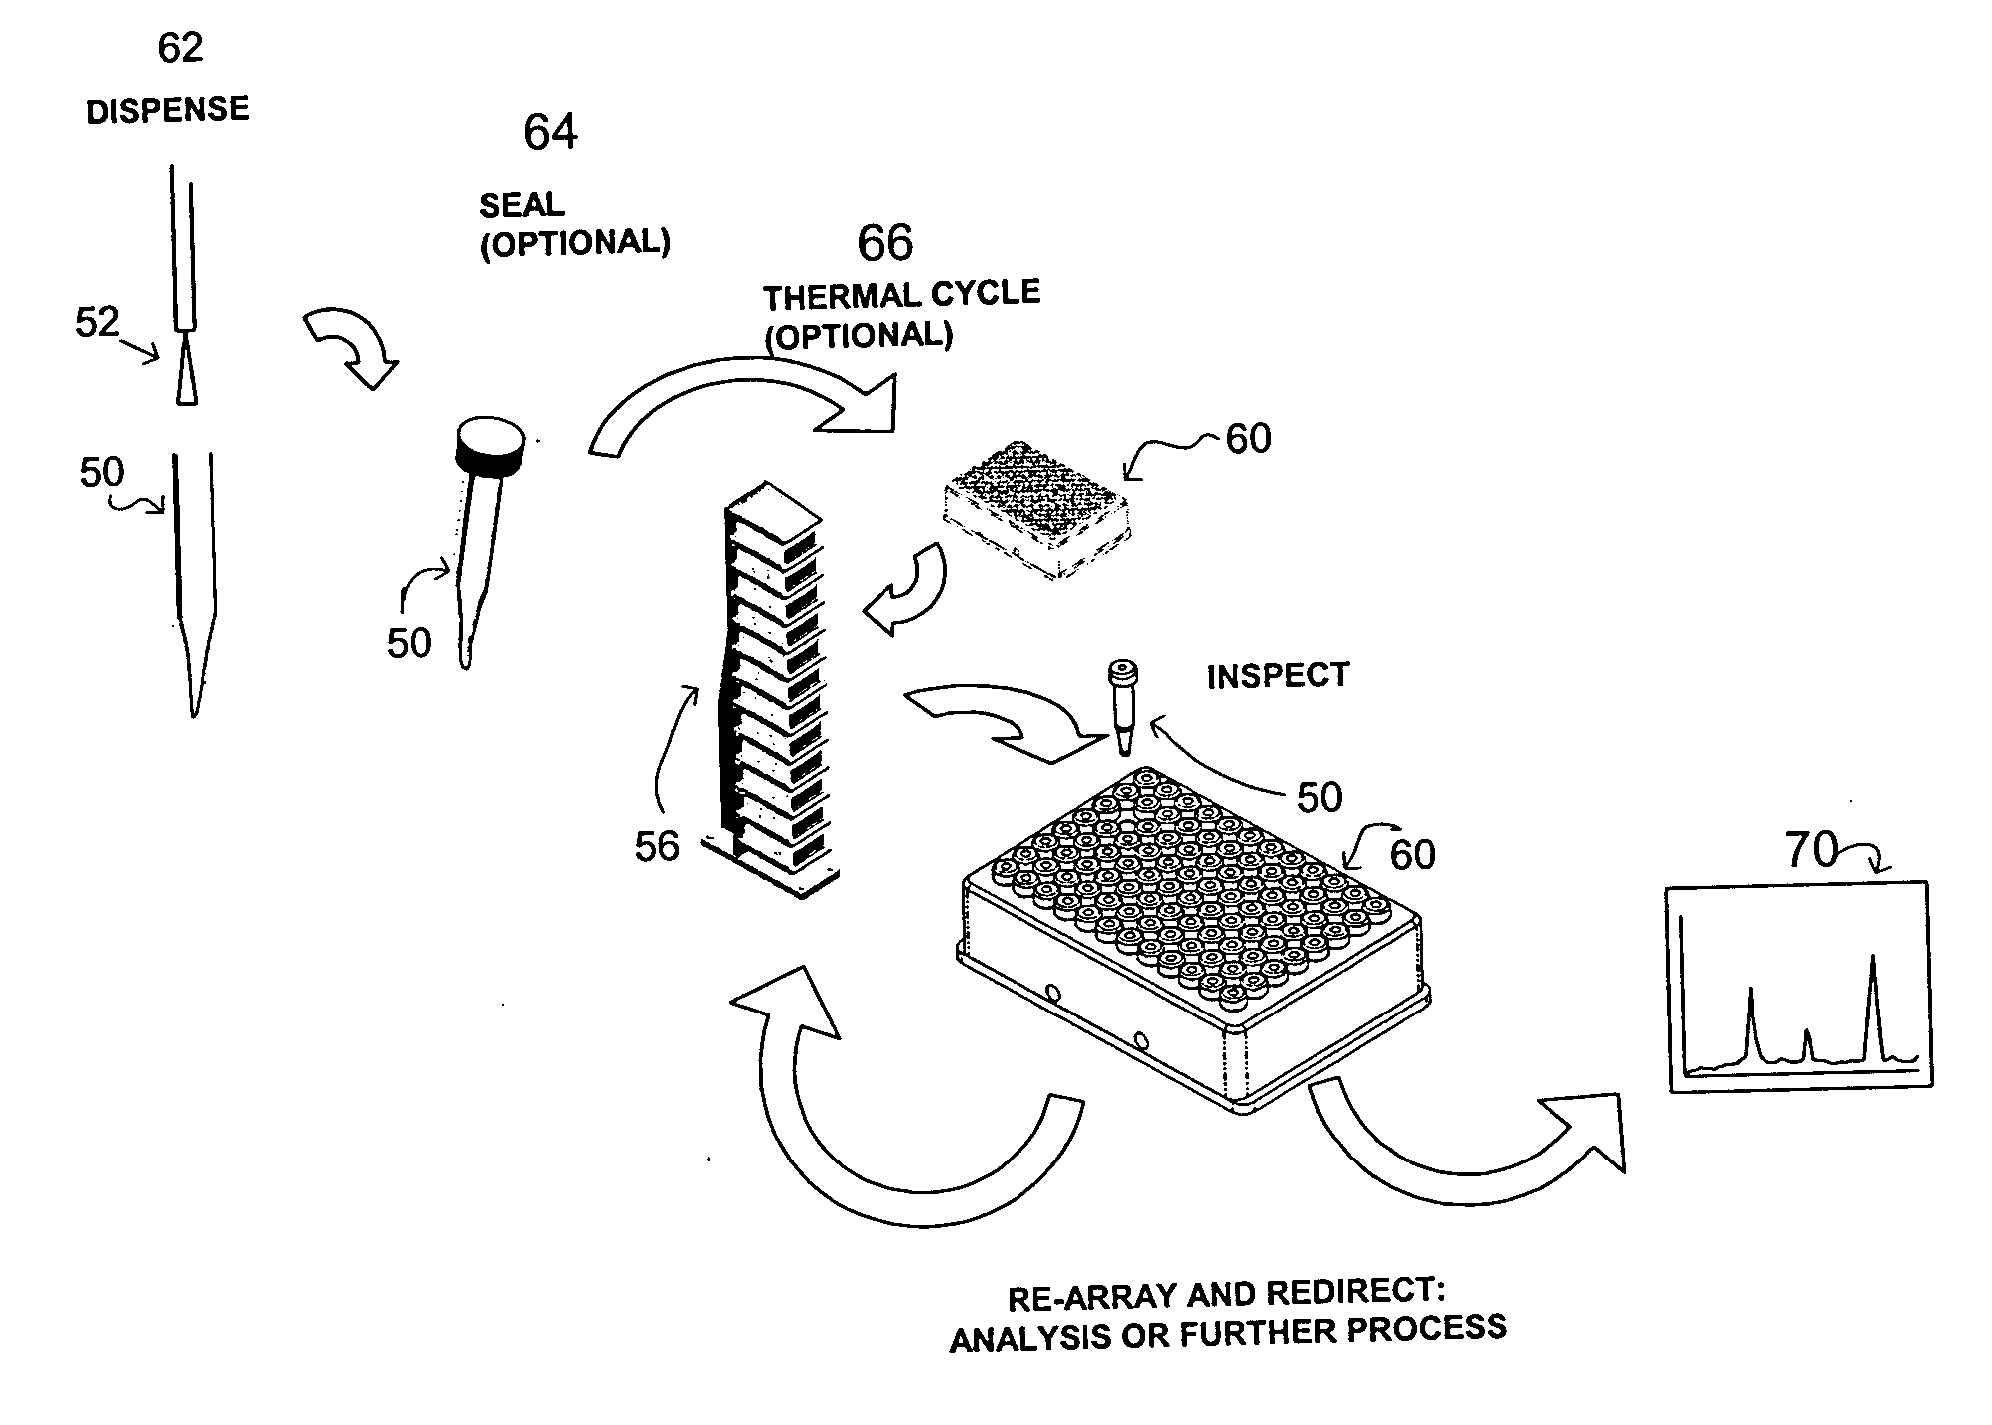 Apparatus and method for high-throughput preparation and spectroscopic classification and characterization of compositions